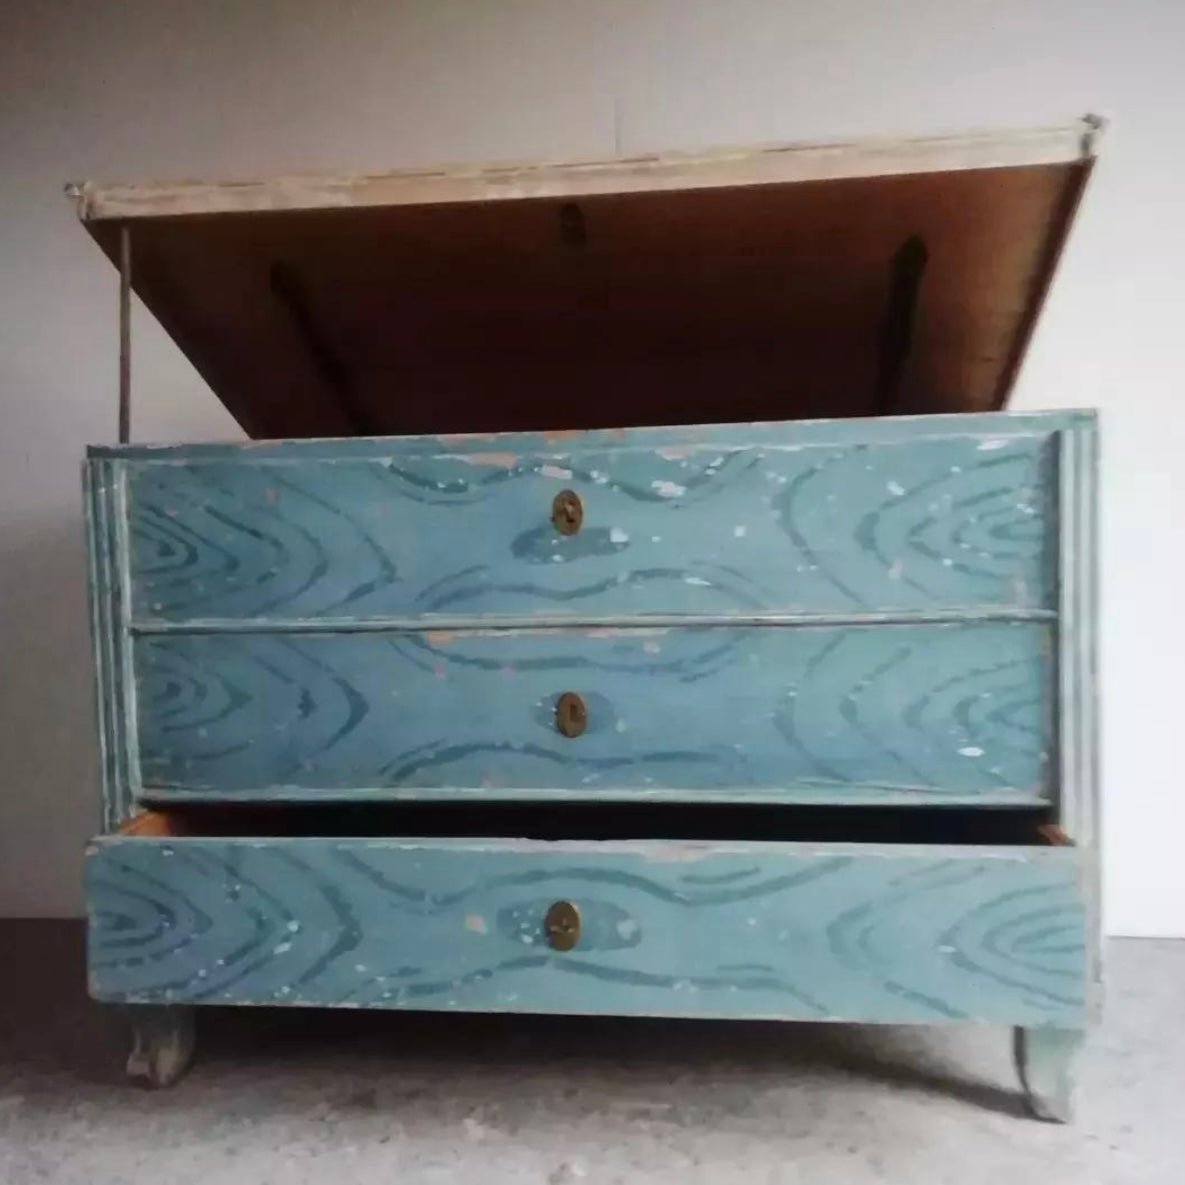 Painted Chest from Belgium